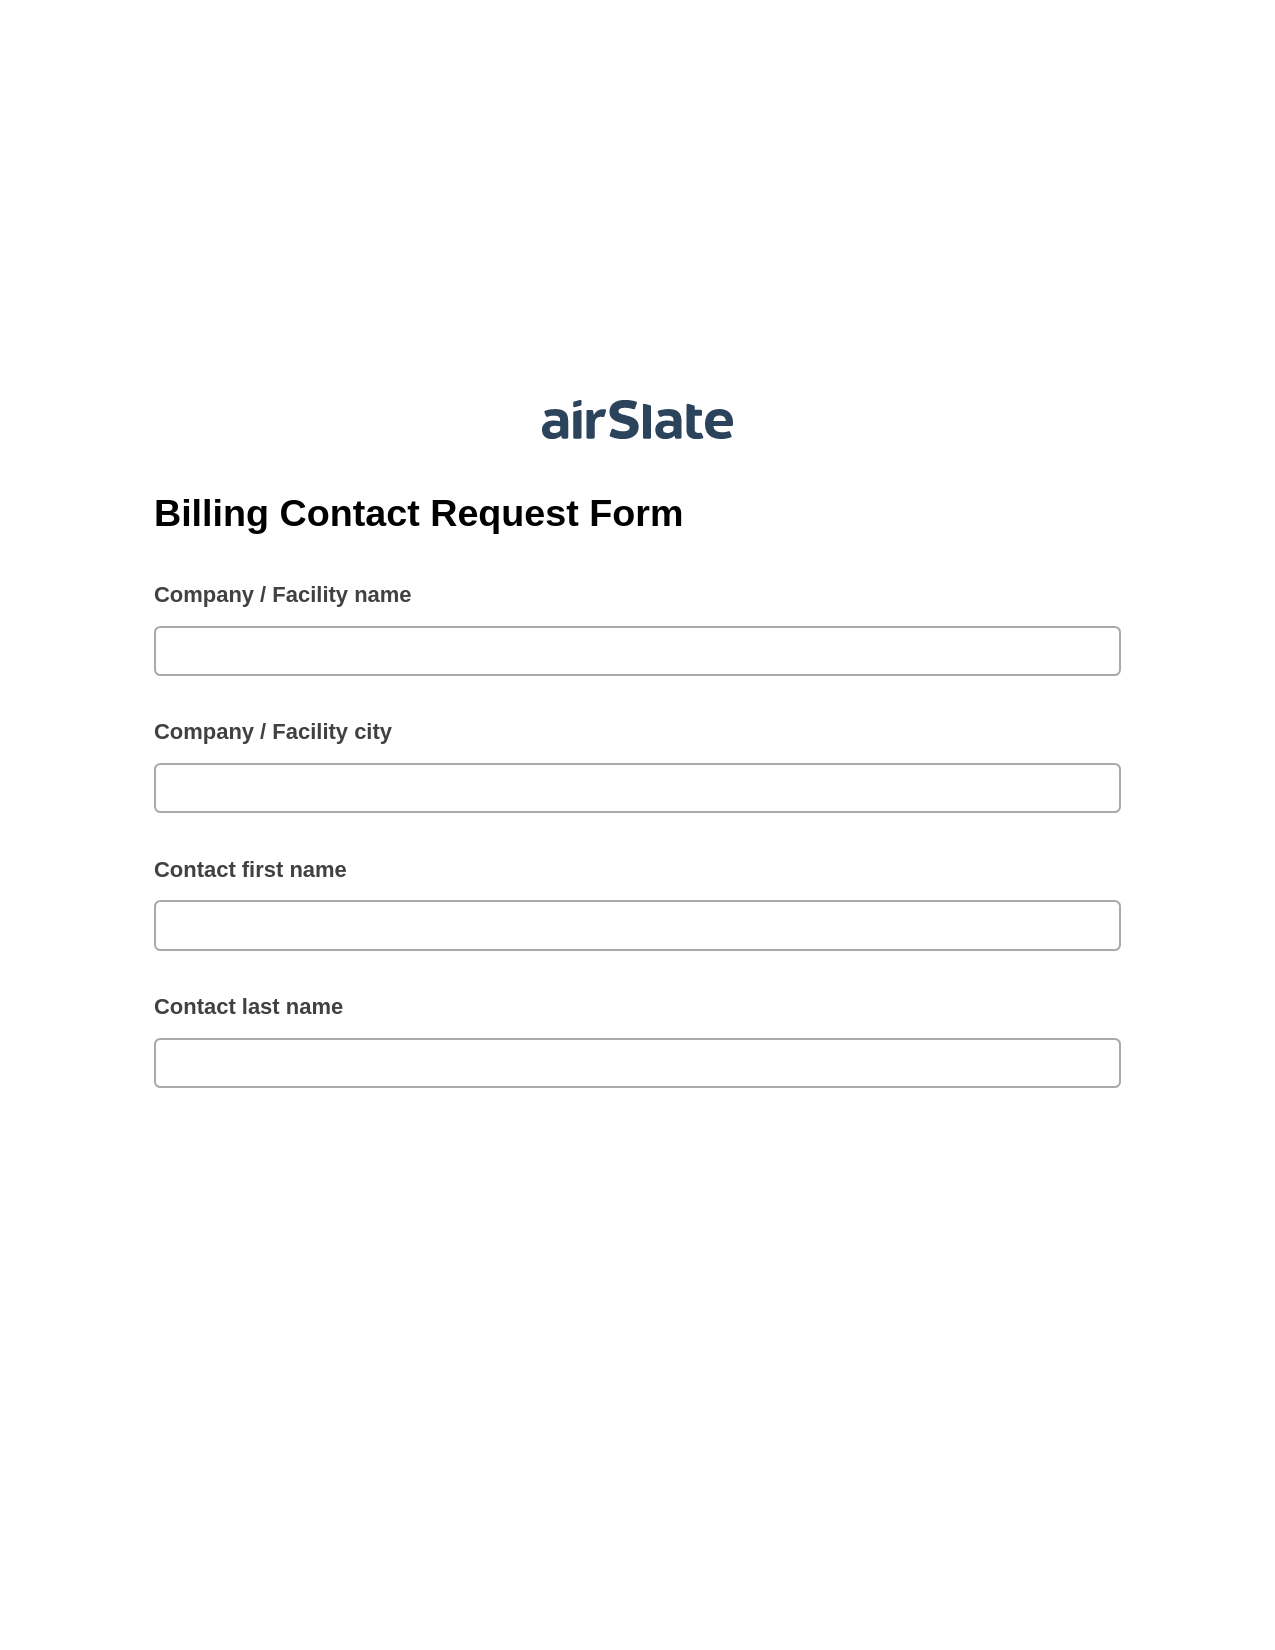 Billing Contact Request Form System Bot - Slack Two-Way Binding Bot, Mailchimp add recipient to audience Bot, Archive to SharePoint Folder Bot